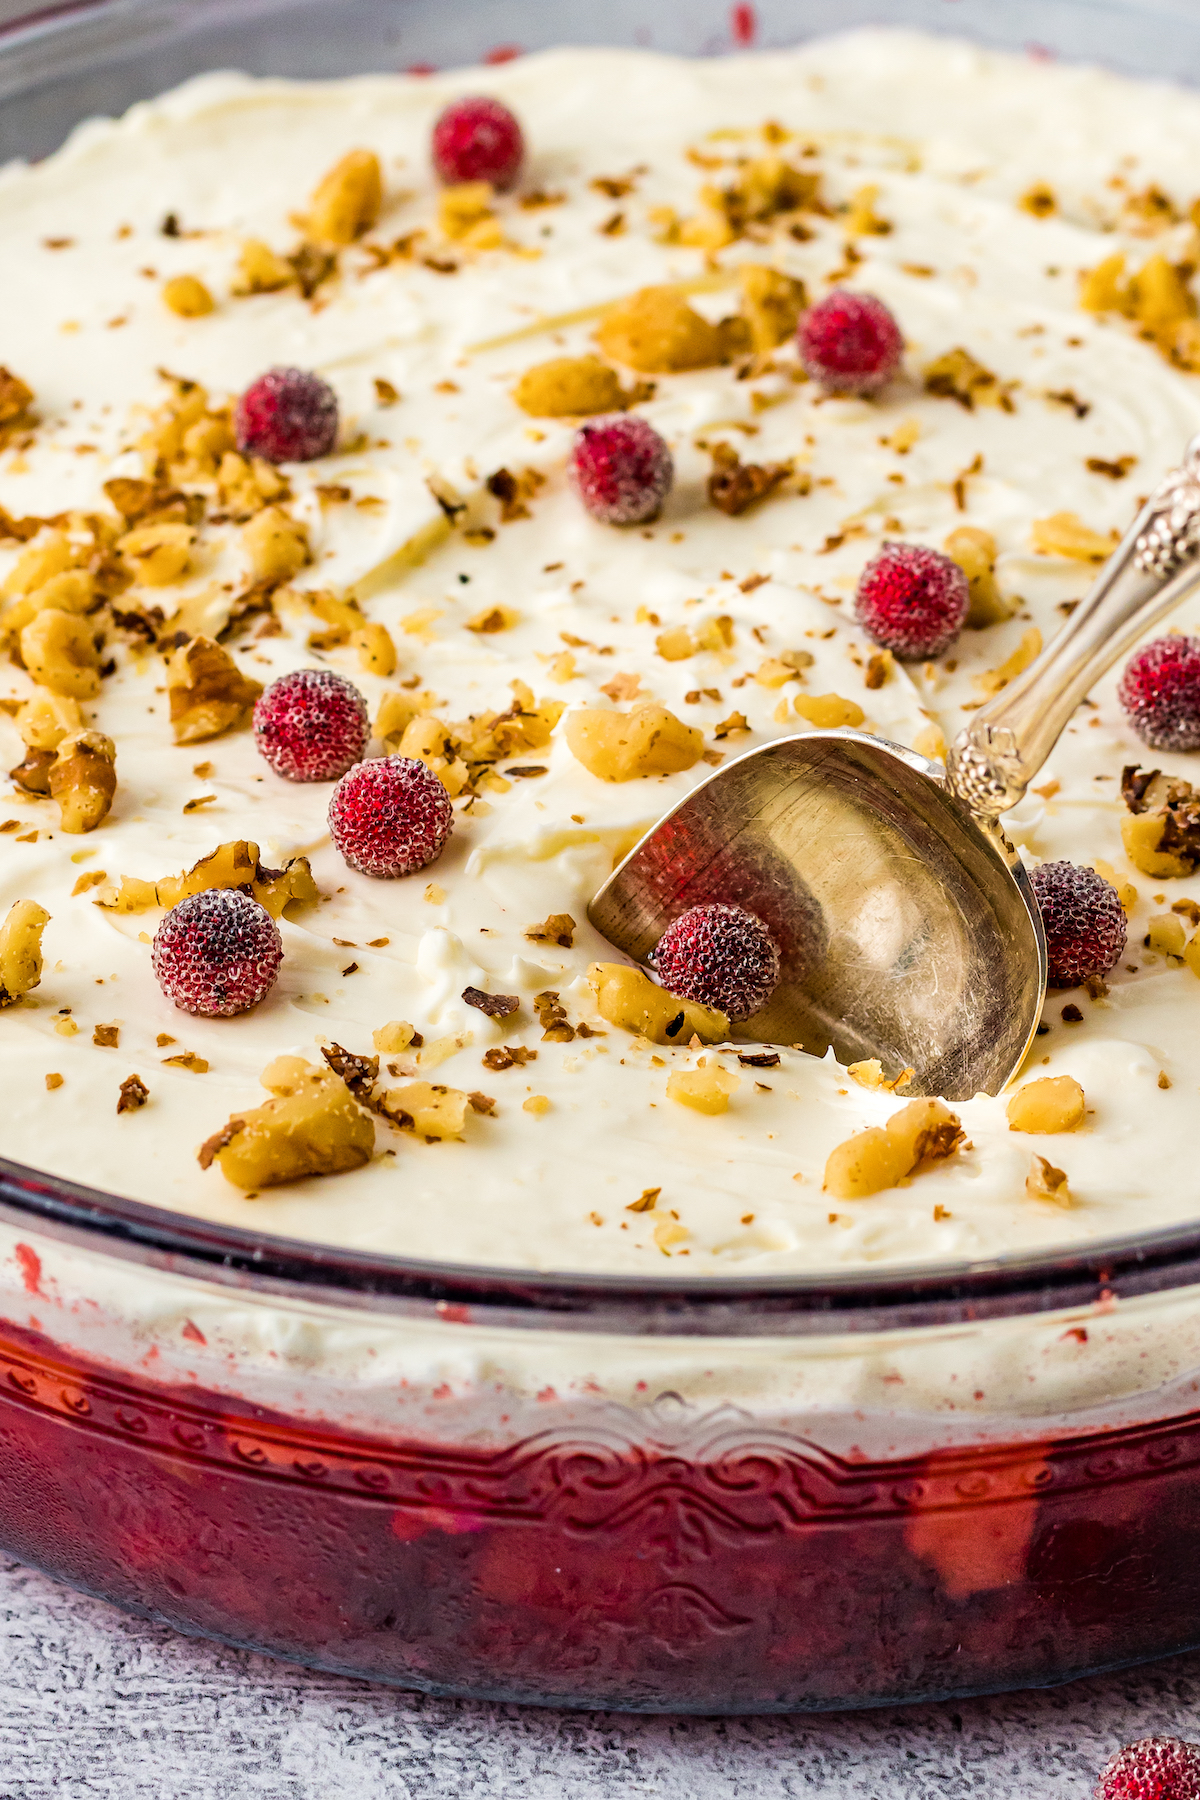 A glass bowl of jello salad with a red, fruit-filled bottom layer and creamy white top layer. The top is sprinkled with chopped nuts and sugared cranberries. A golden spoon is stuck into the creamy layer.